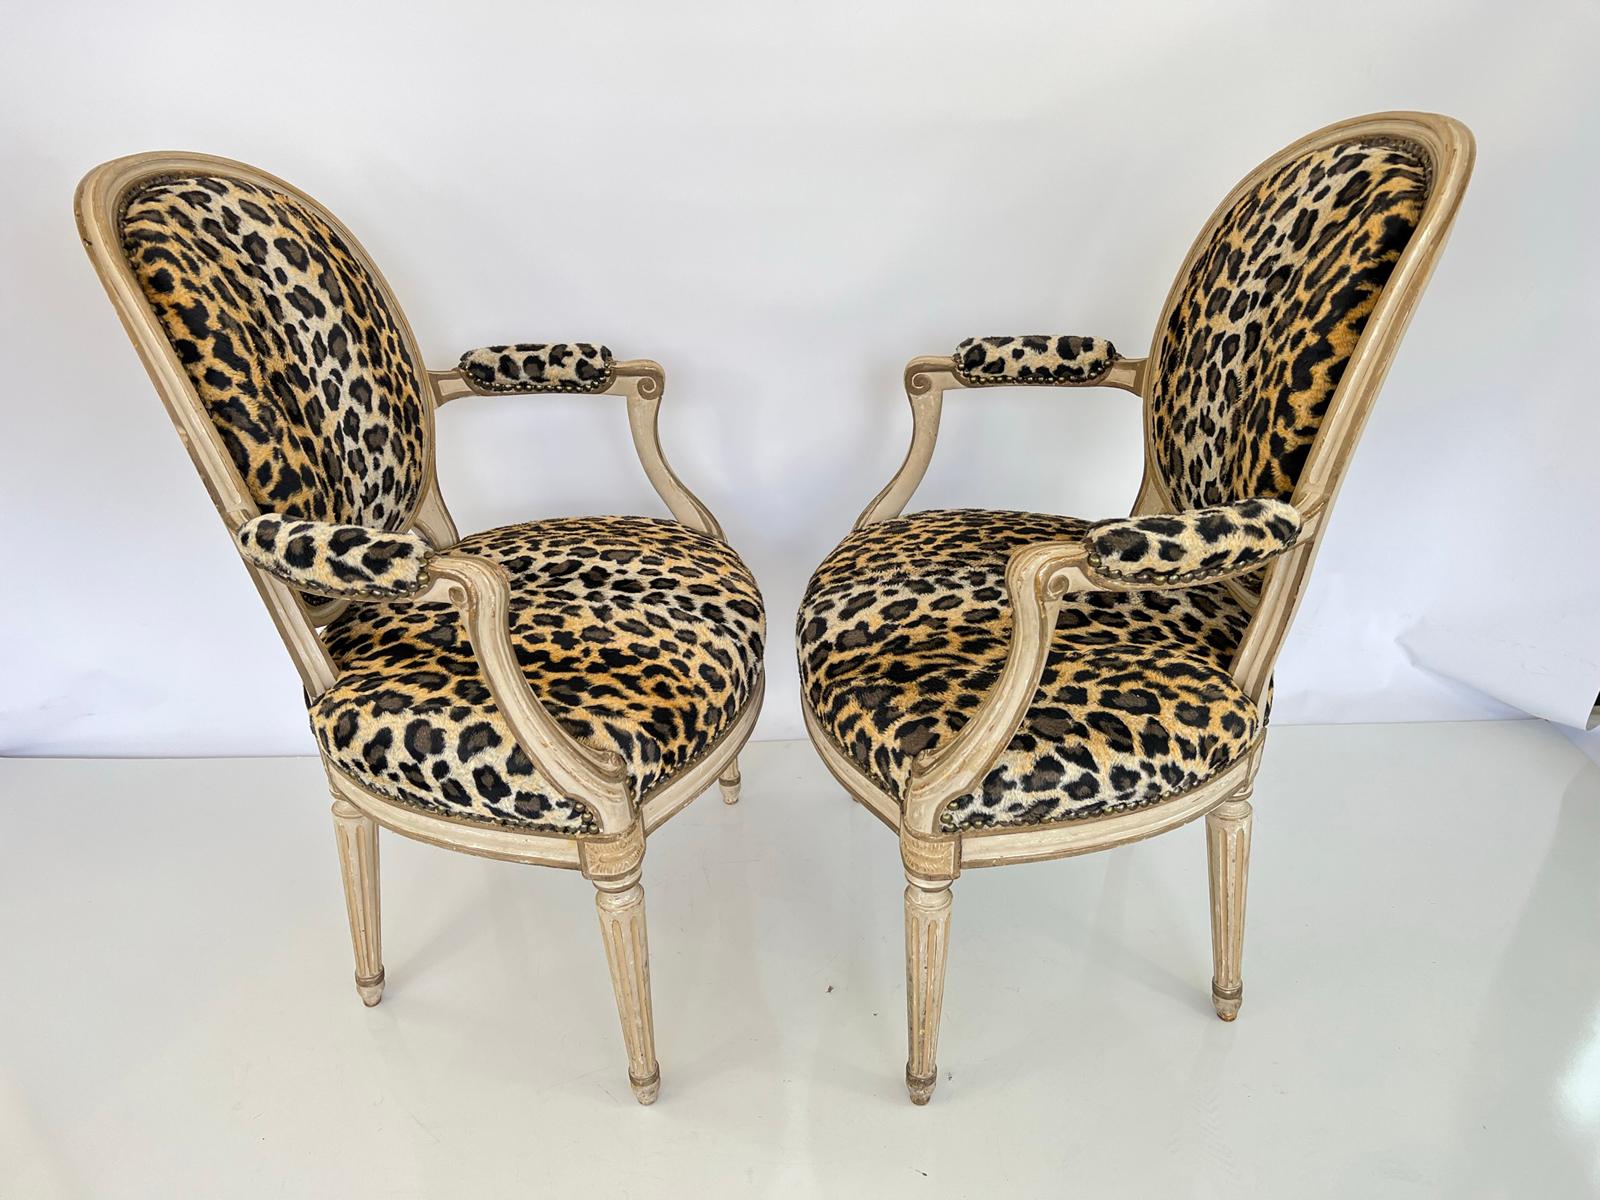 Pair of French Fauteuils, Upholstered in Faux Cheetah Print For Sale 4